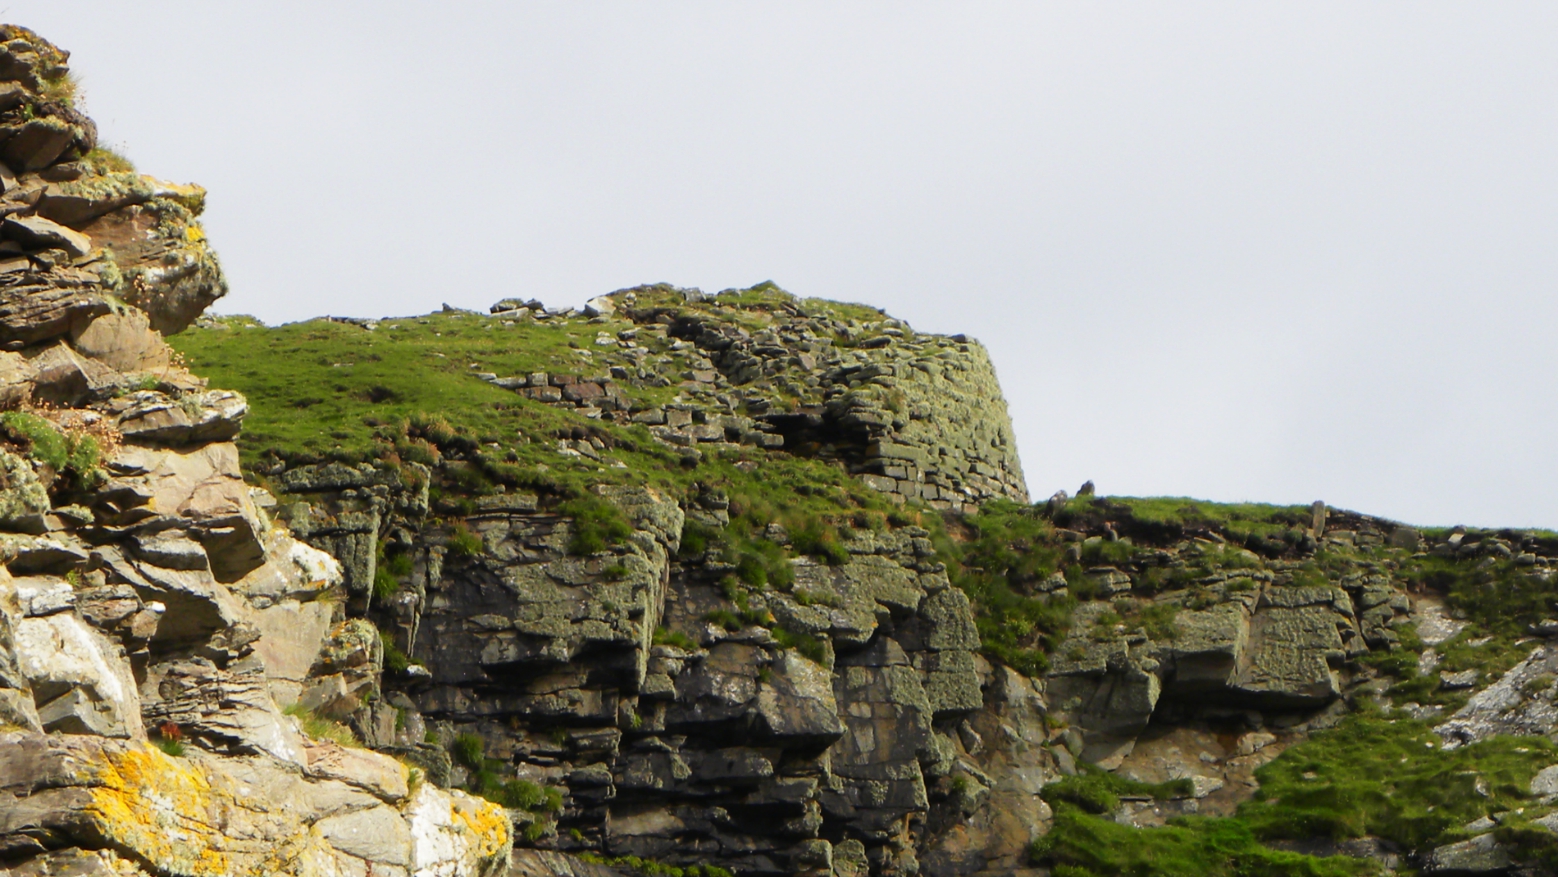 Showing the broch on the cliffs